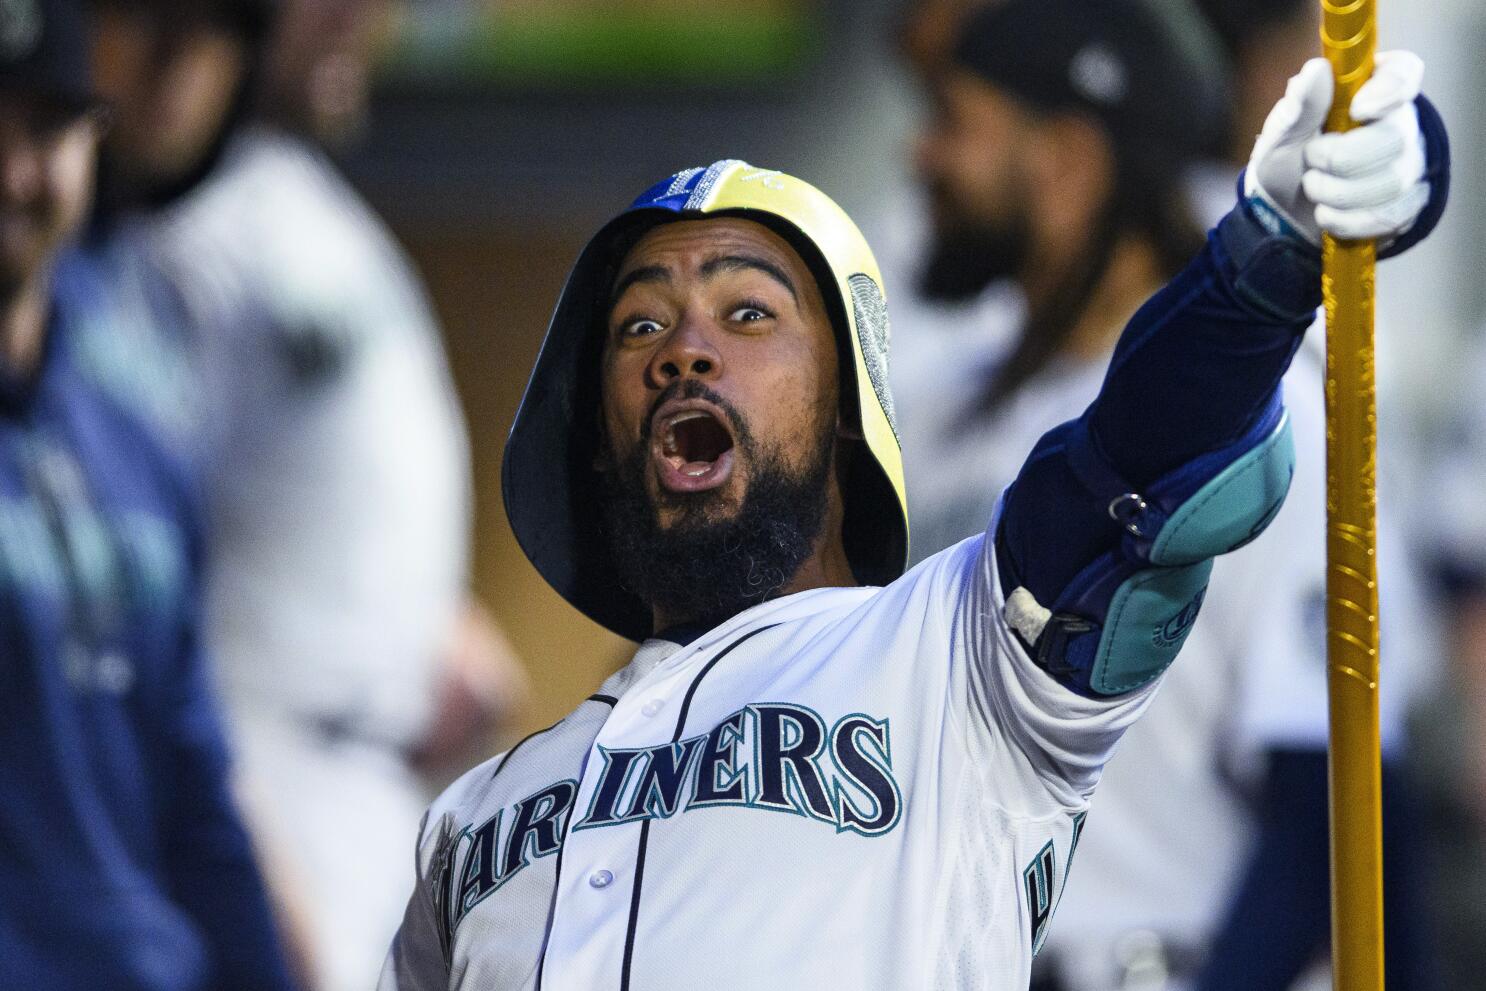 A's top Mariners 5-2